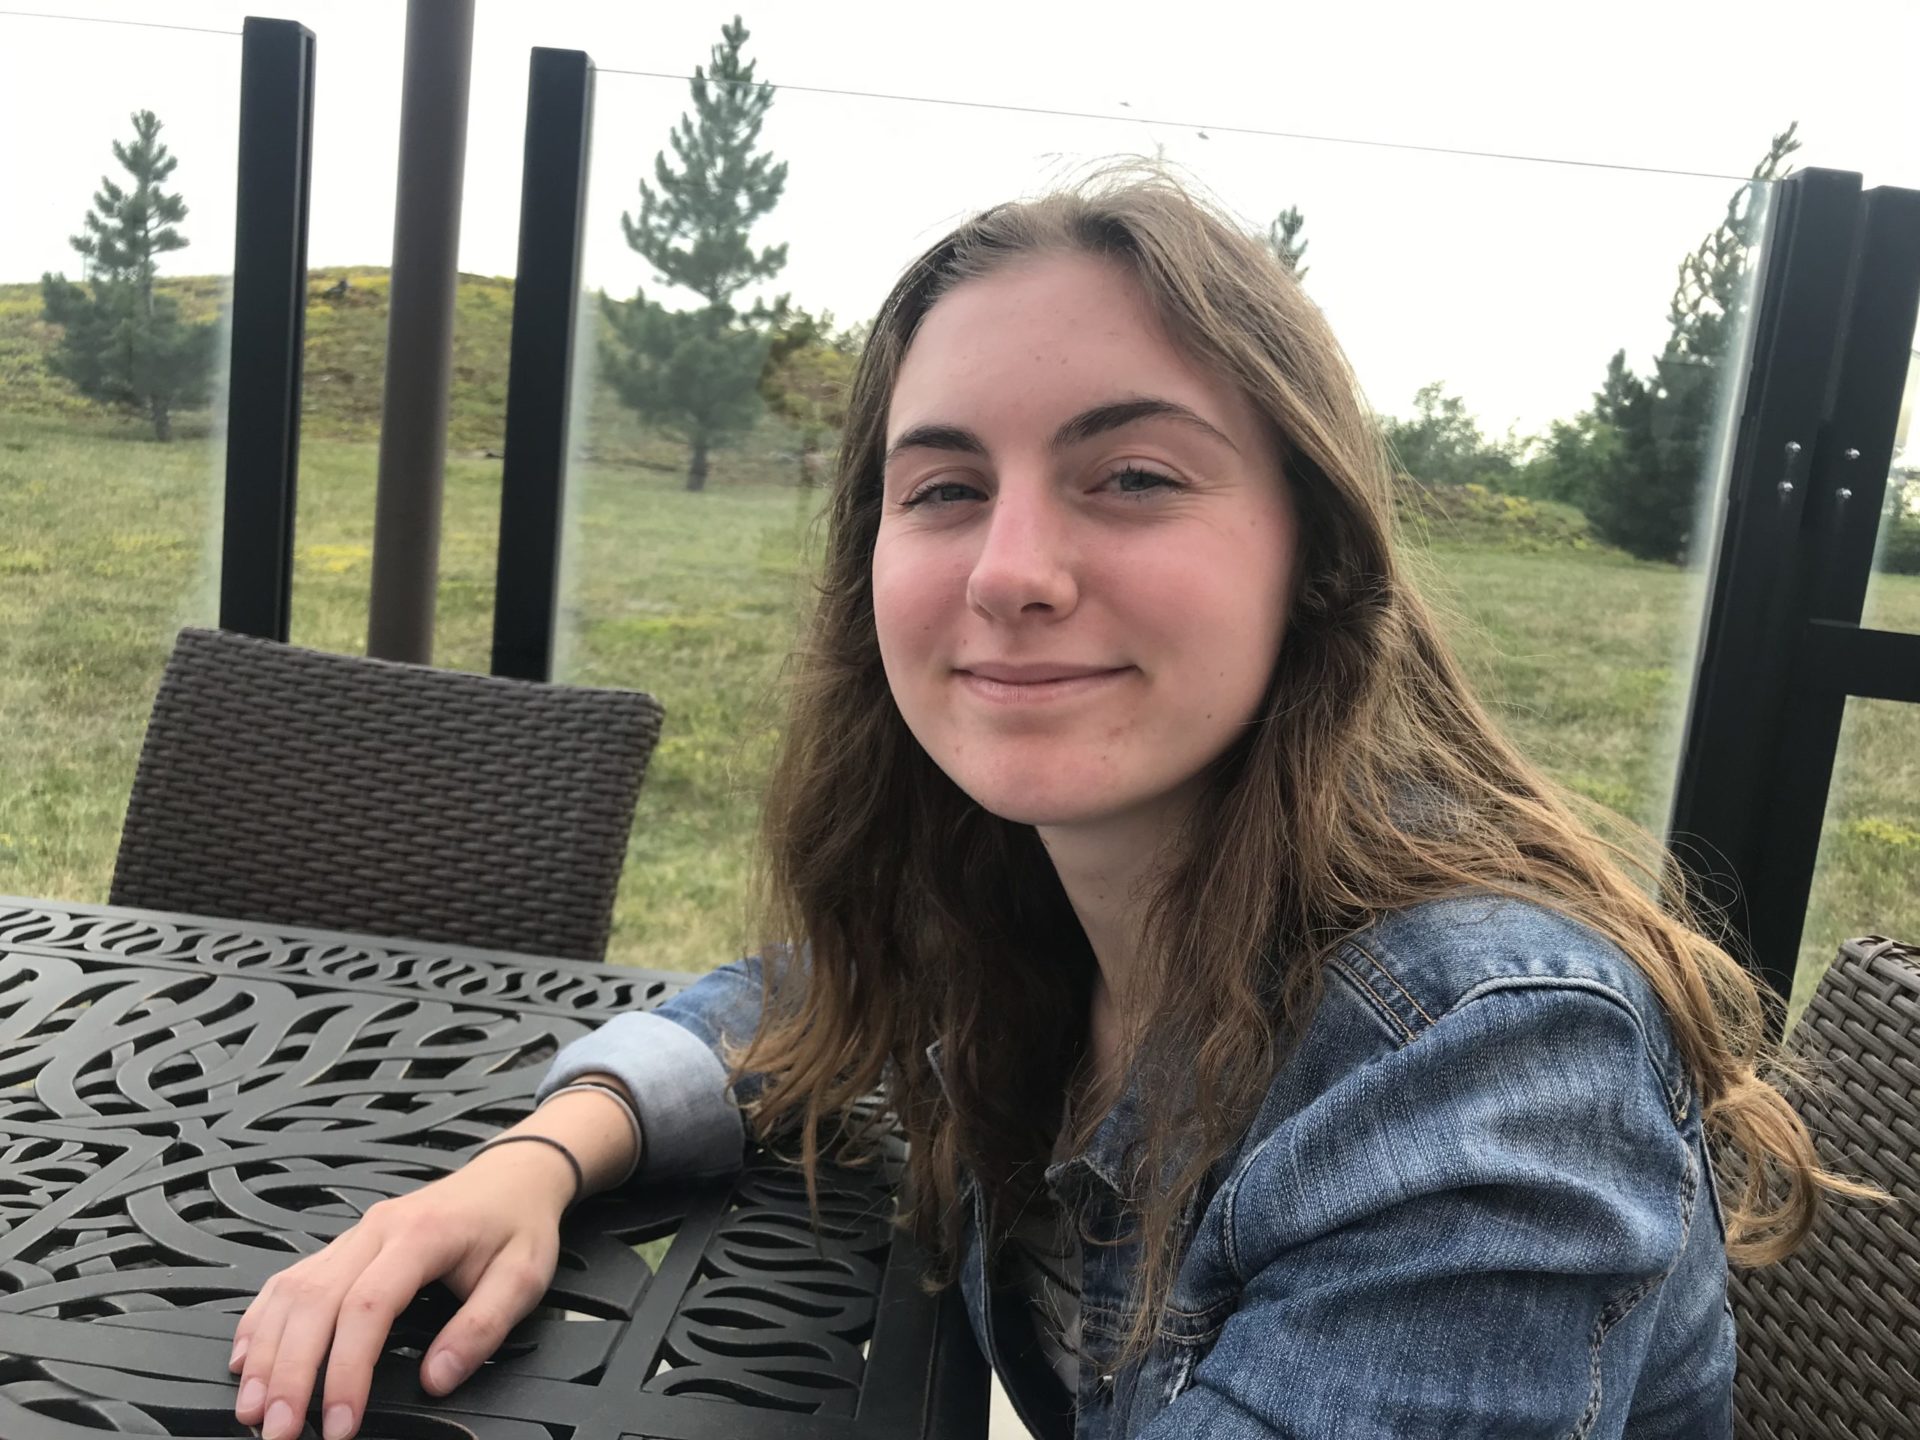 Ted Rogers Scholarship recipient Abby sitting at a table outside